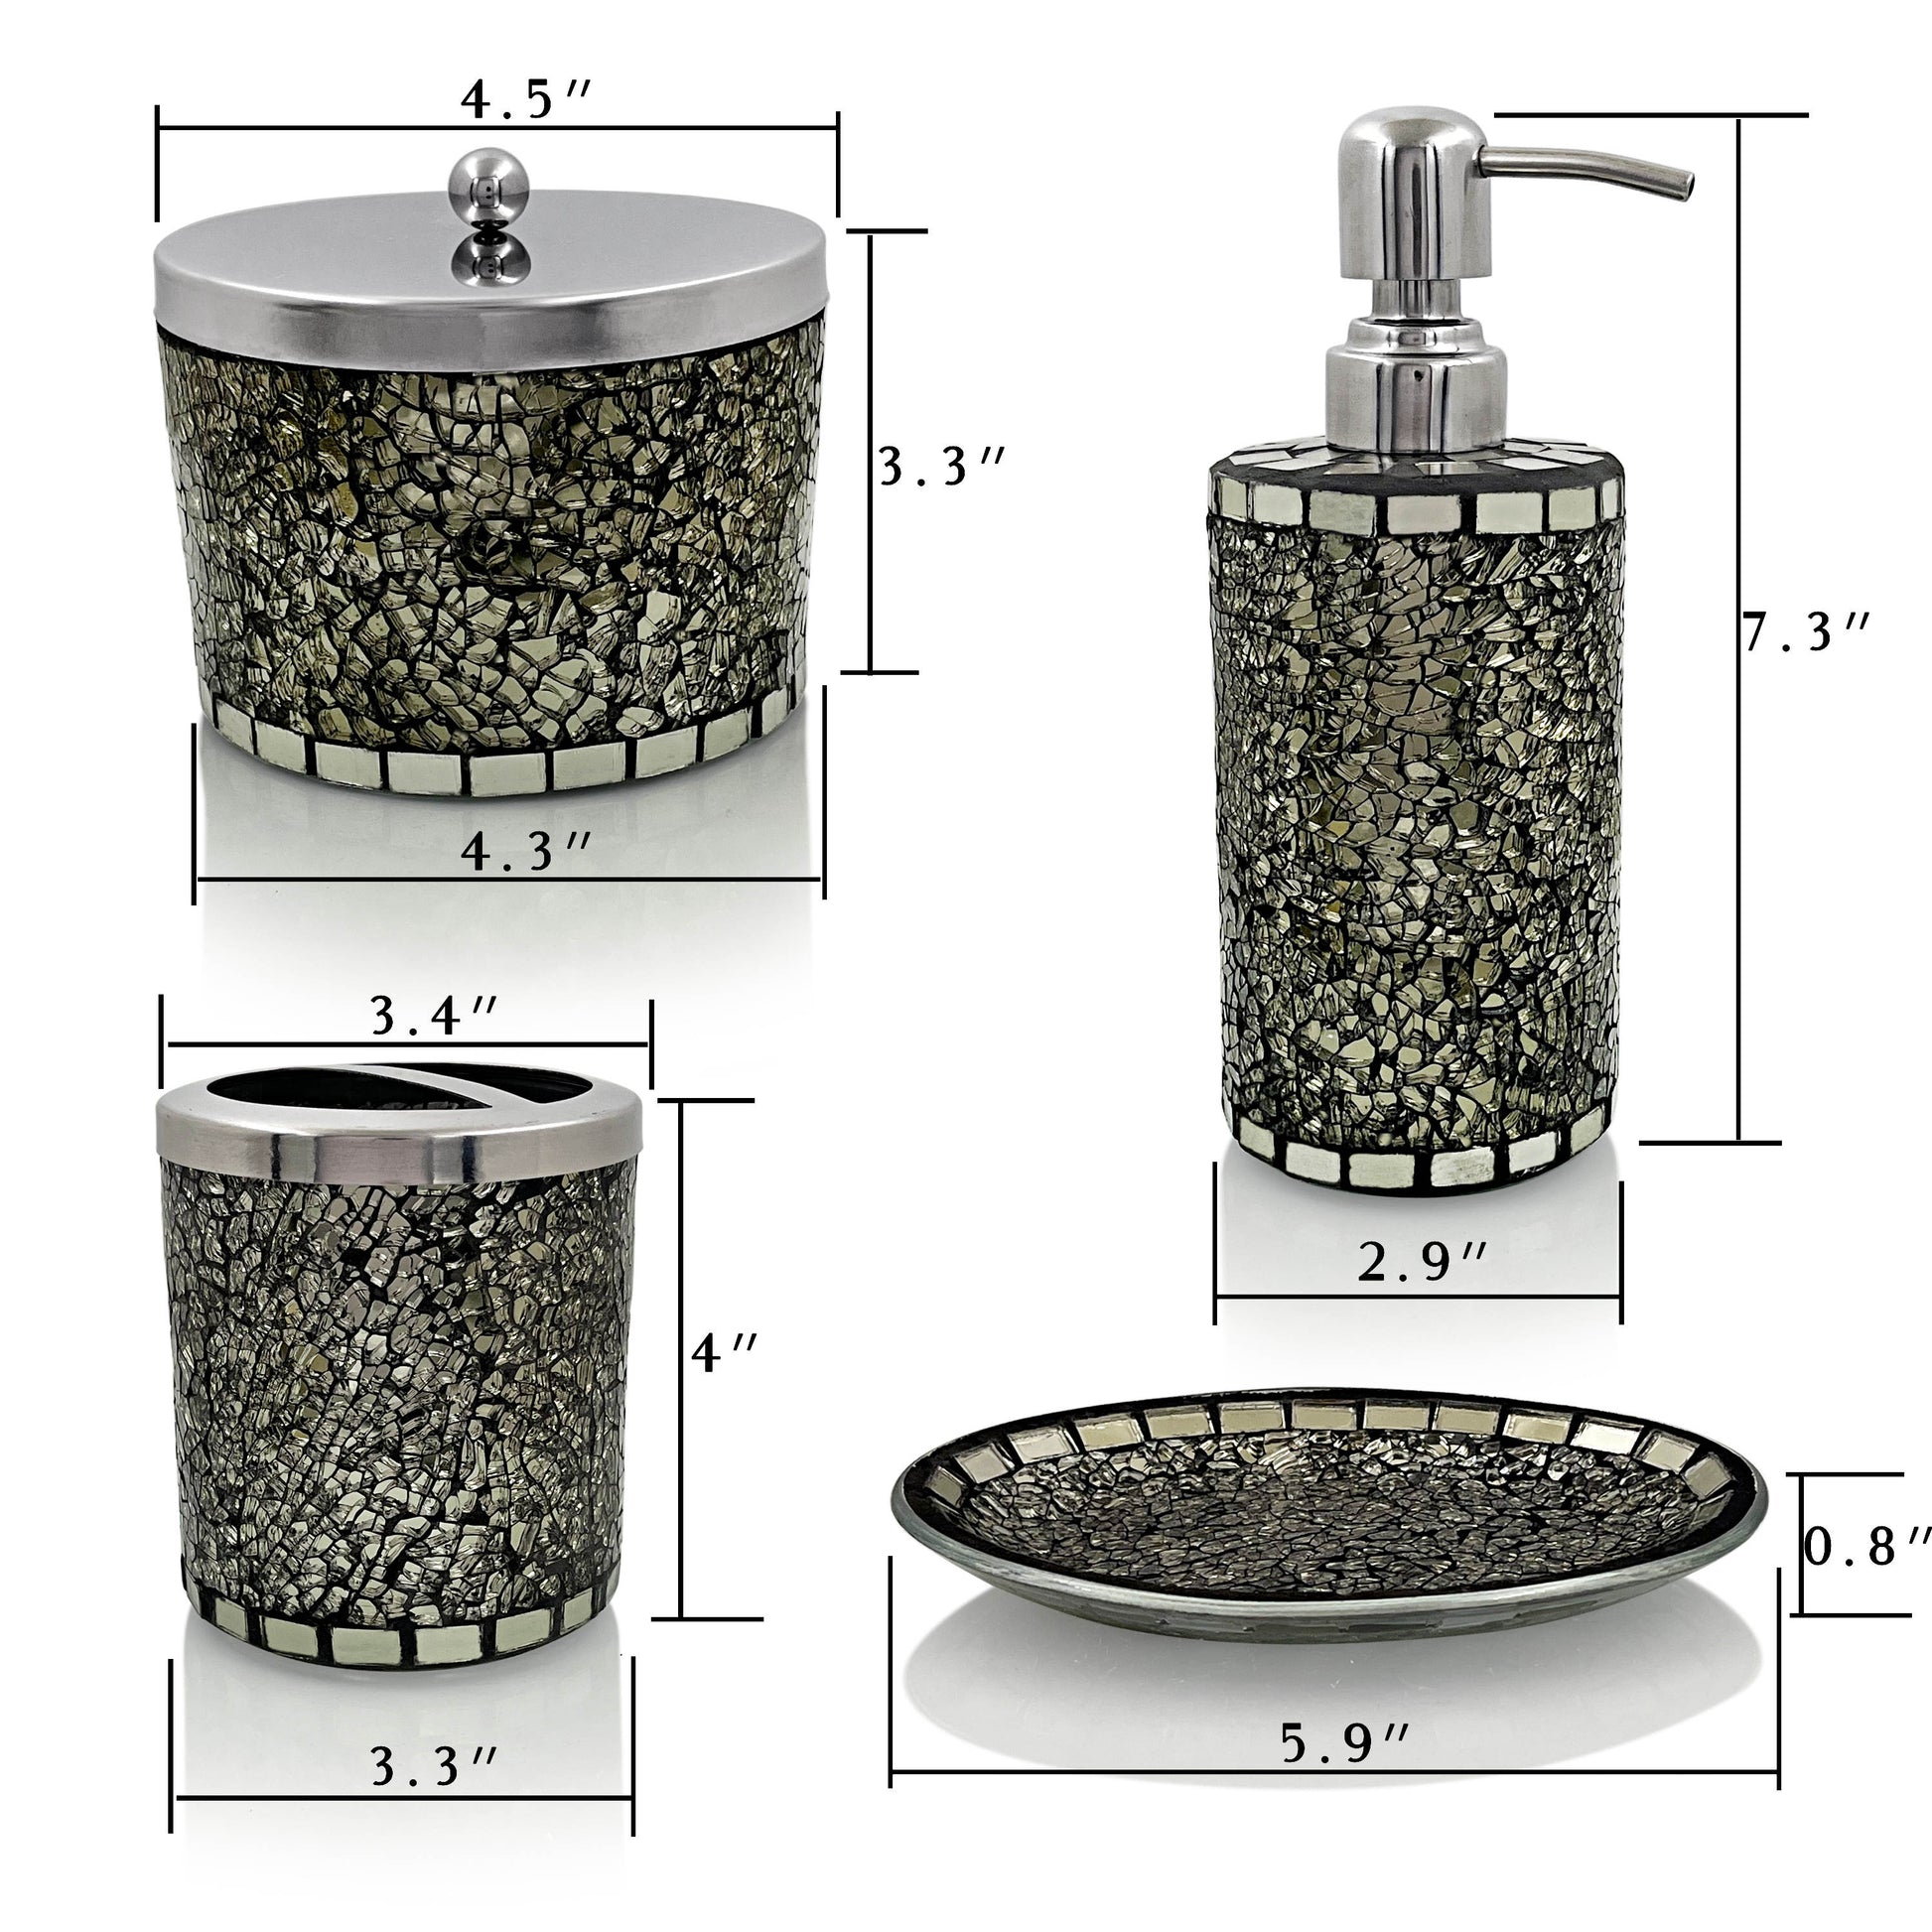 LushAccents Bathroom Accessories Set, 4-Piece Decorative Glass Bathroo –  lushaccents